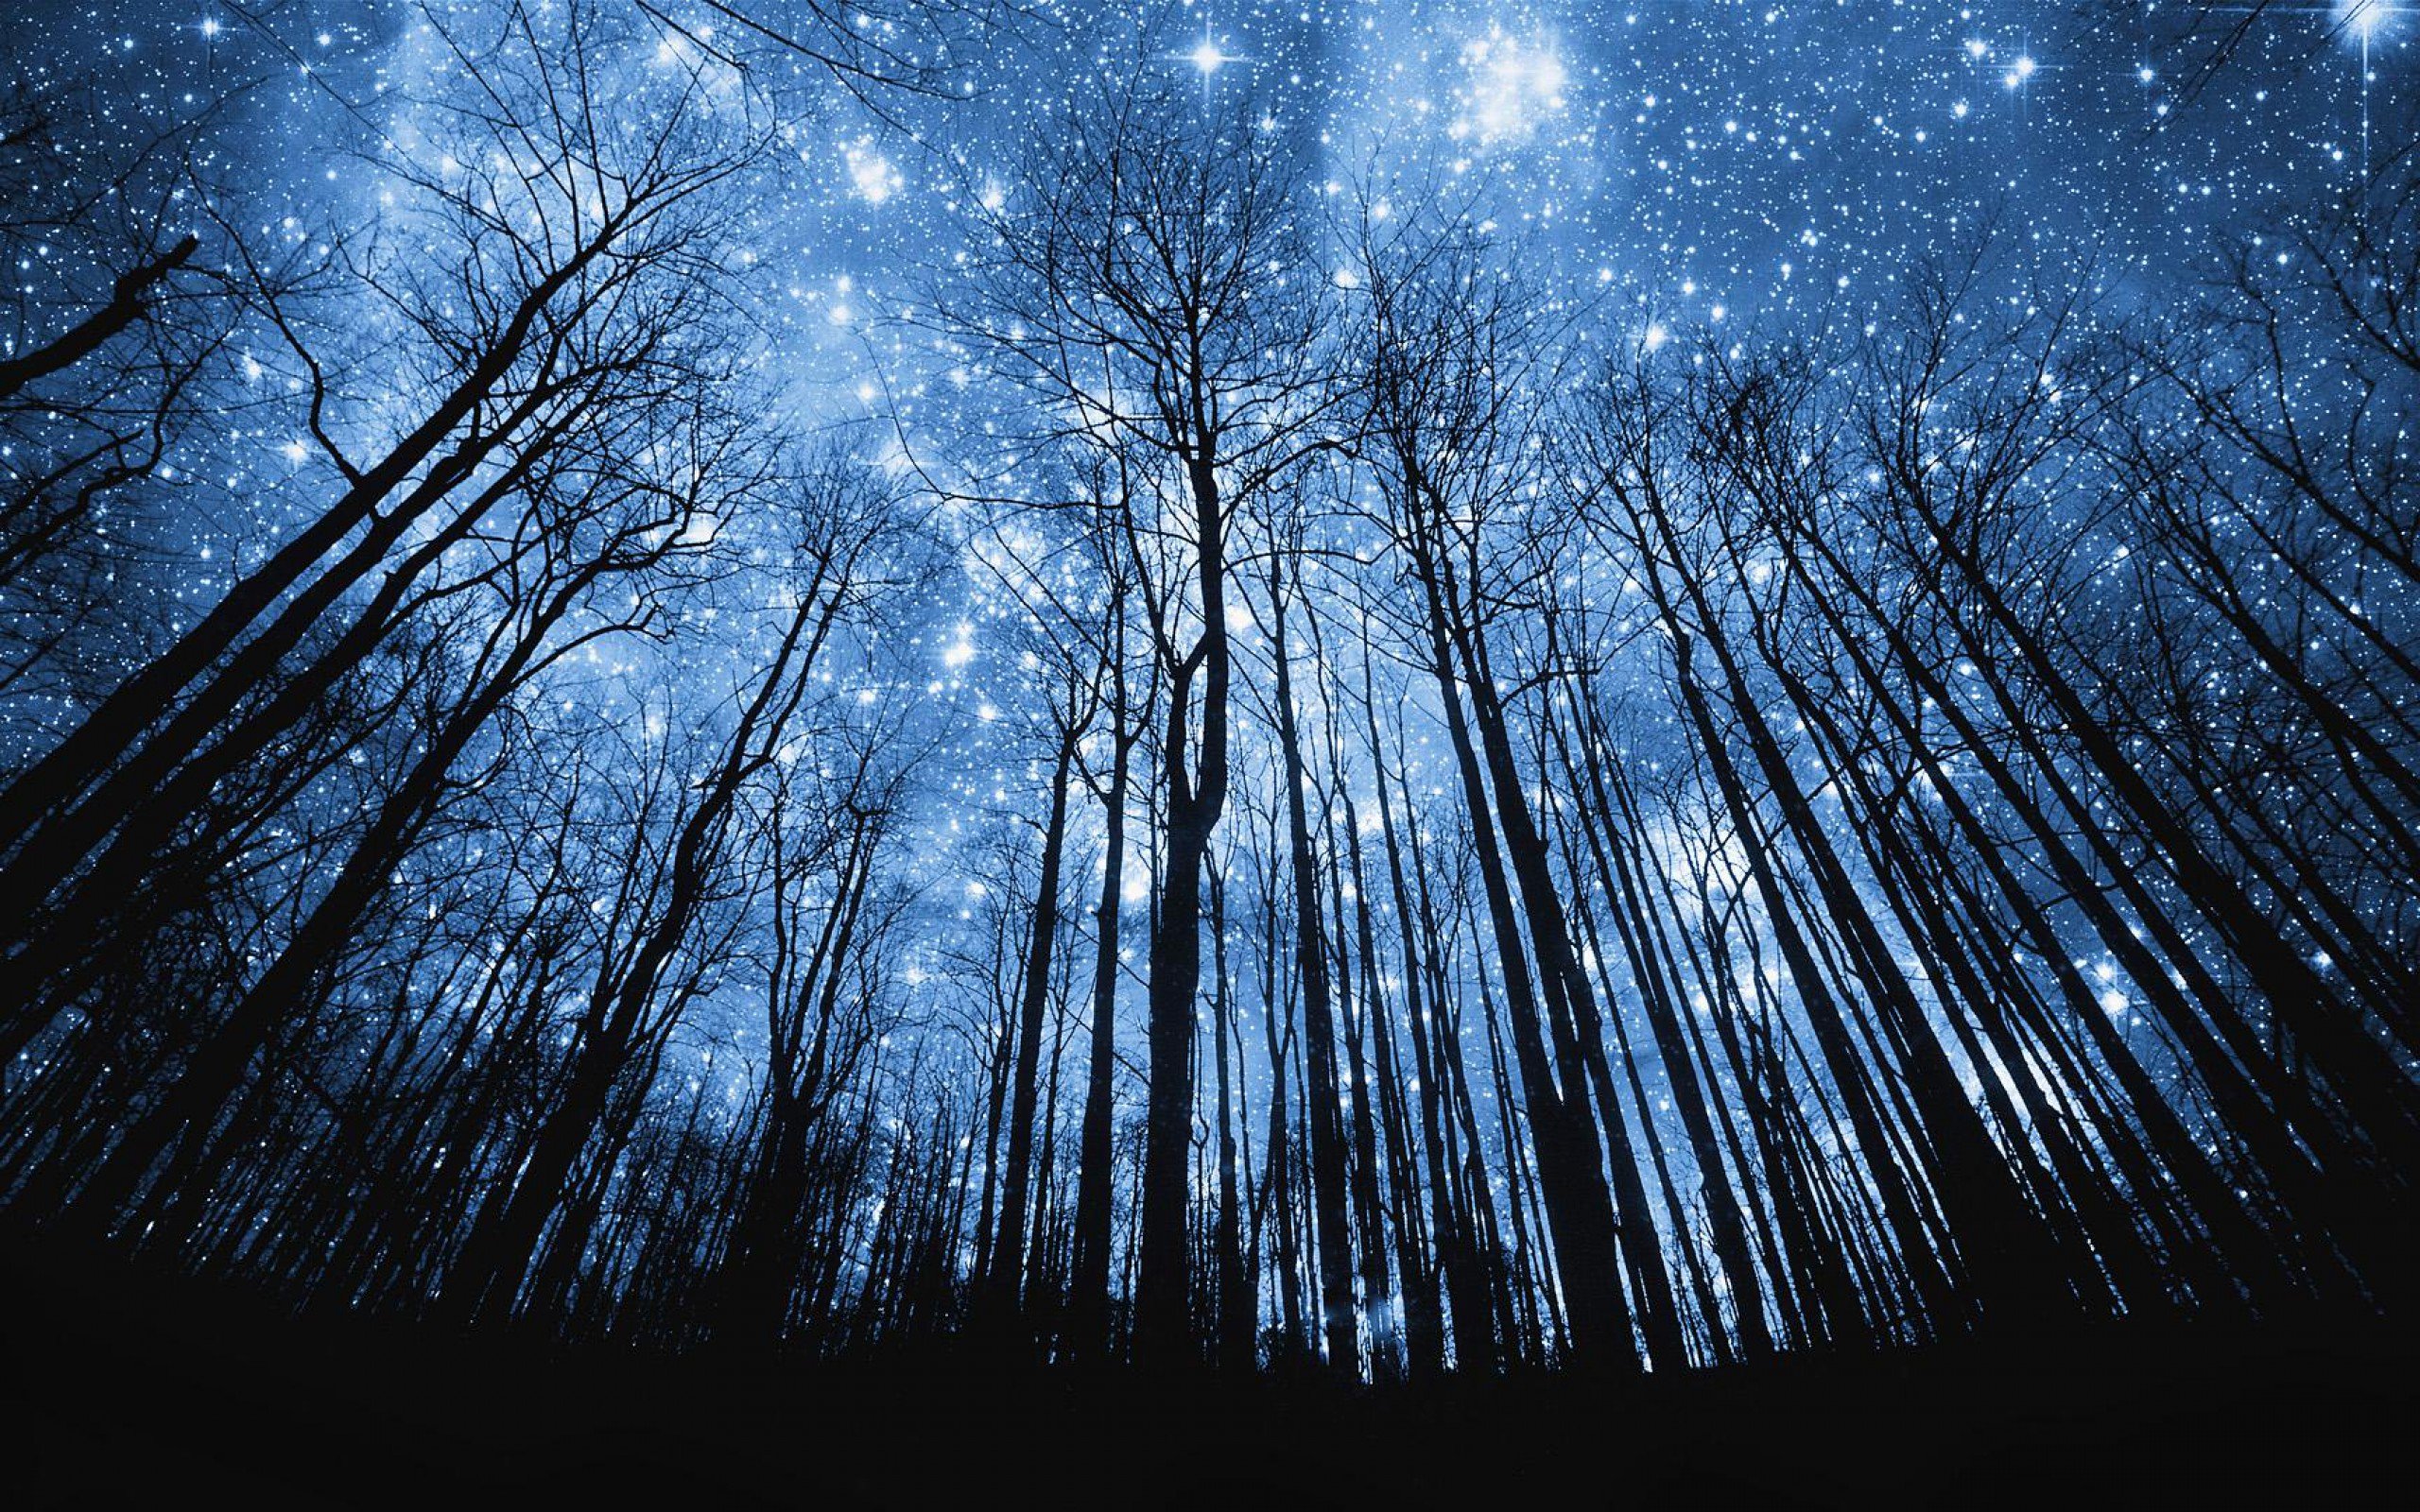 Starry night over the forest wallpaper   1072265